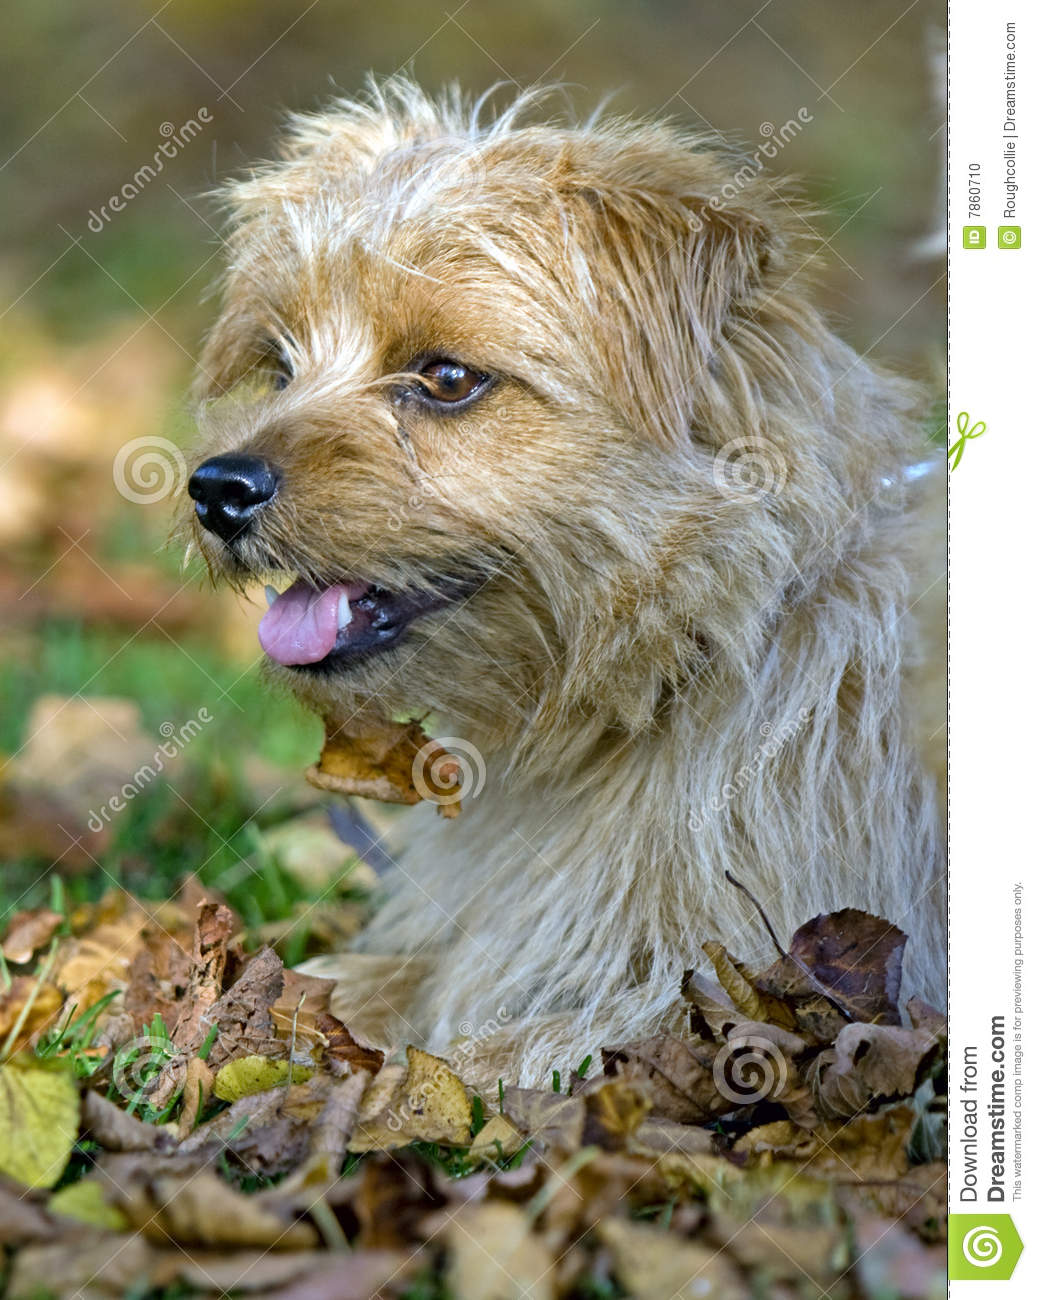     Norkolk Terrier Dog Sitting In A Pile Of Autumn Leaves In Close Up